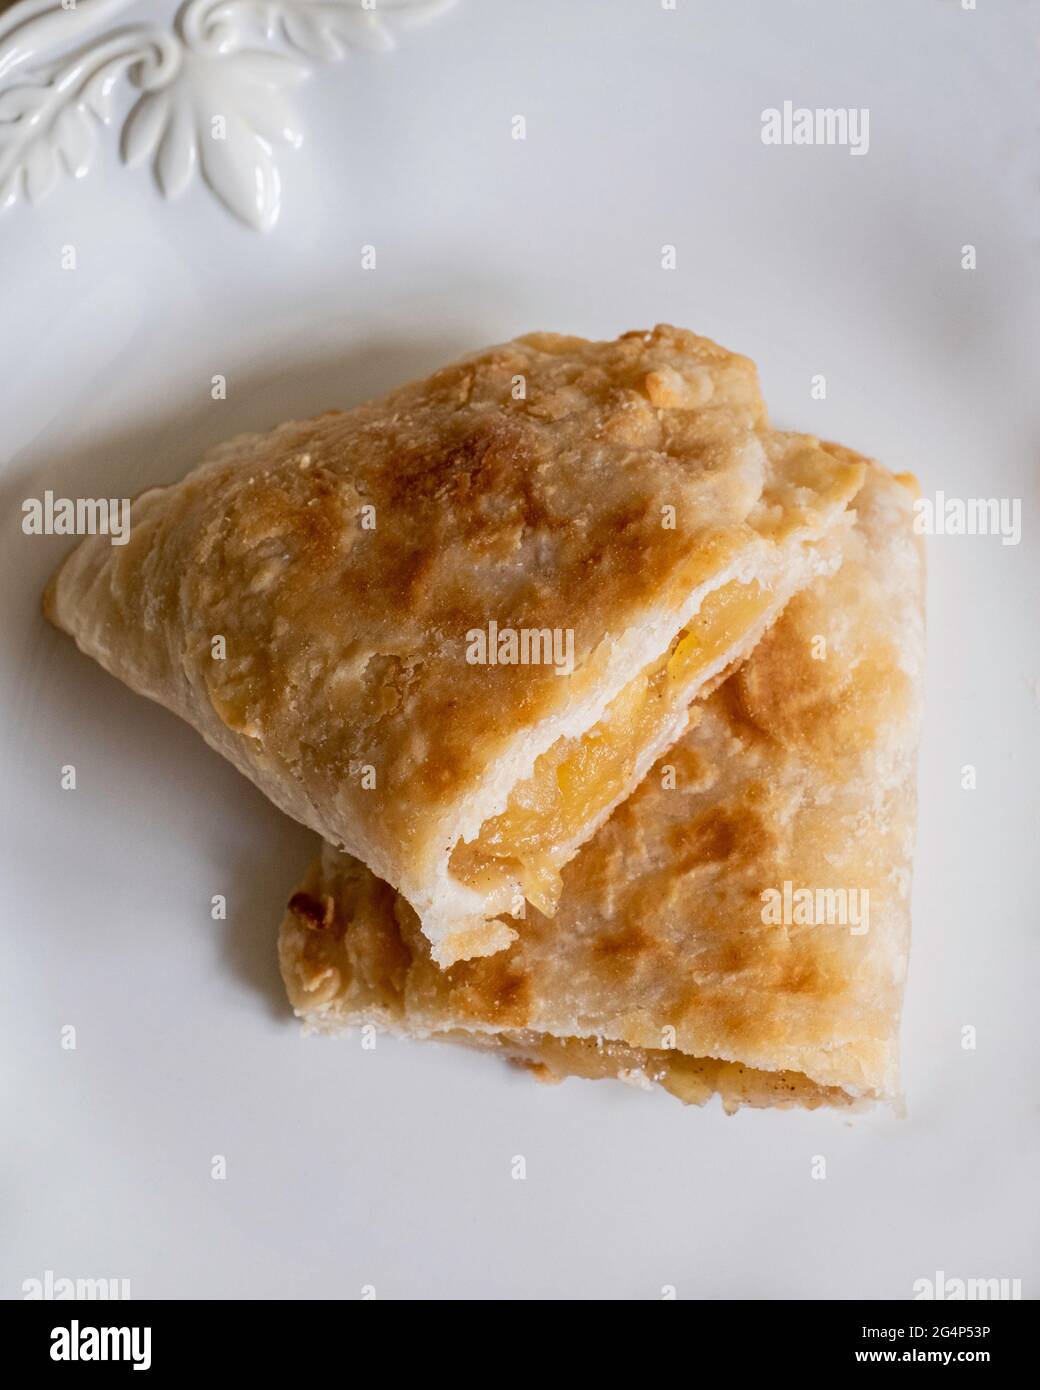 Homemade fried apple pie cut in half made from dried apples with flaky pie crust on a white plate. Stock Photo